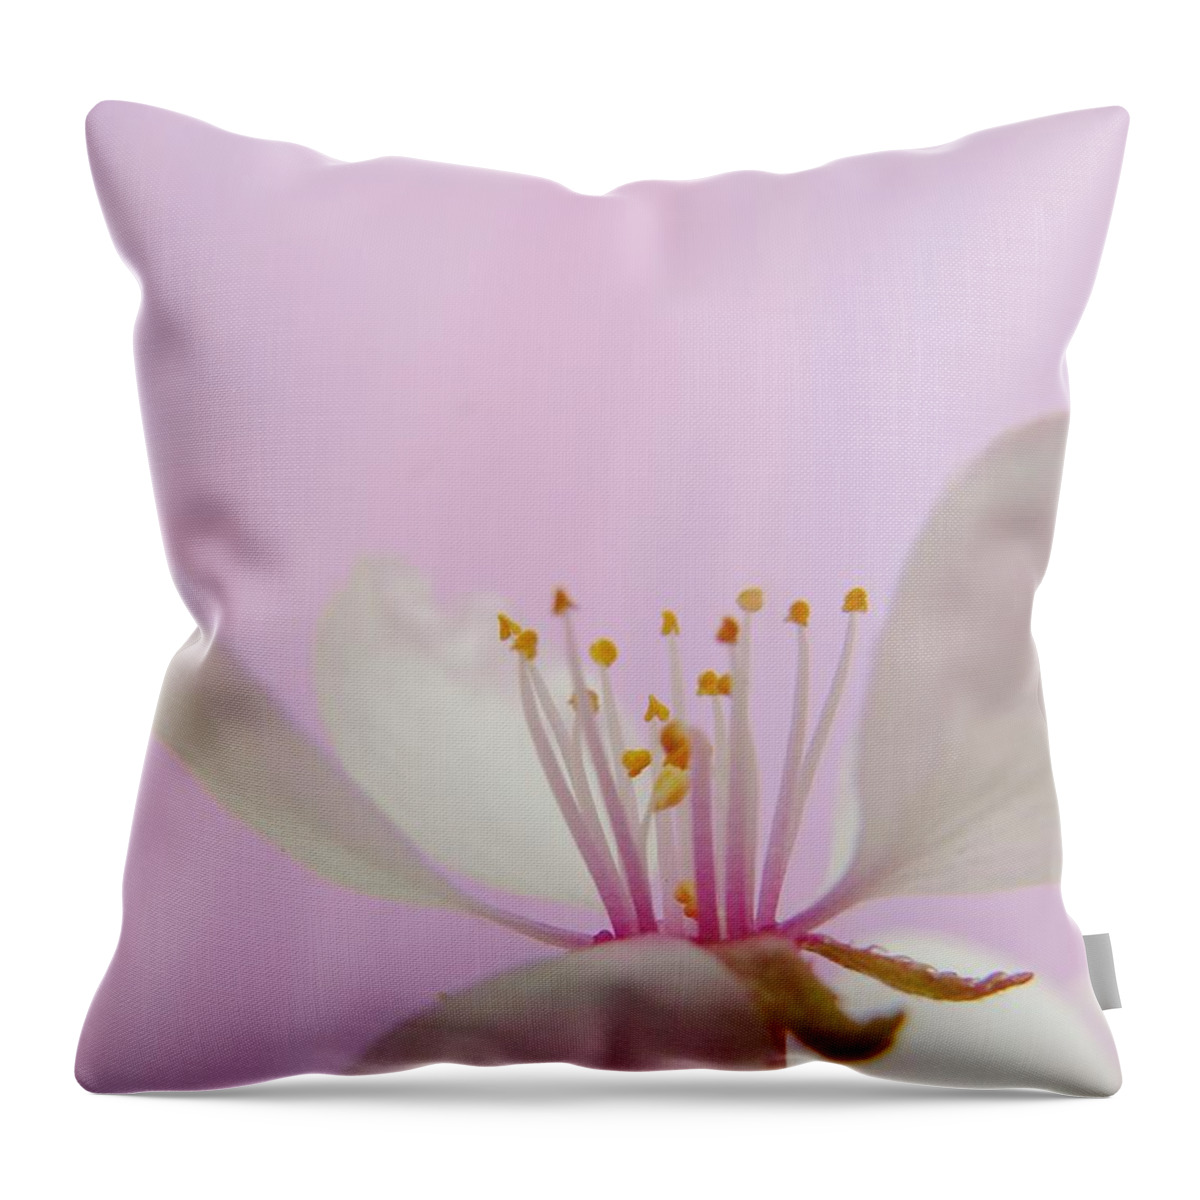 Cherry Throw Pillow featuring the photograph Pretty in Pink Cherry Blossom by Barbara St Jean